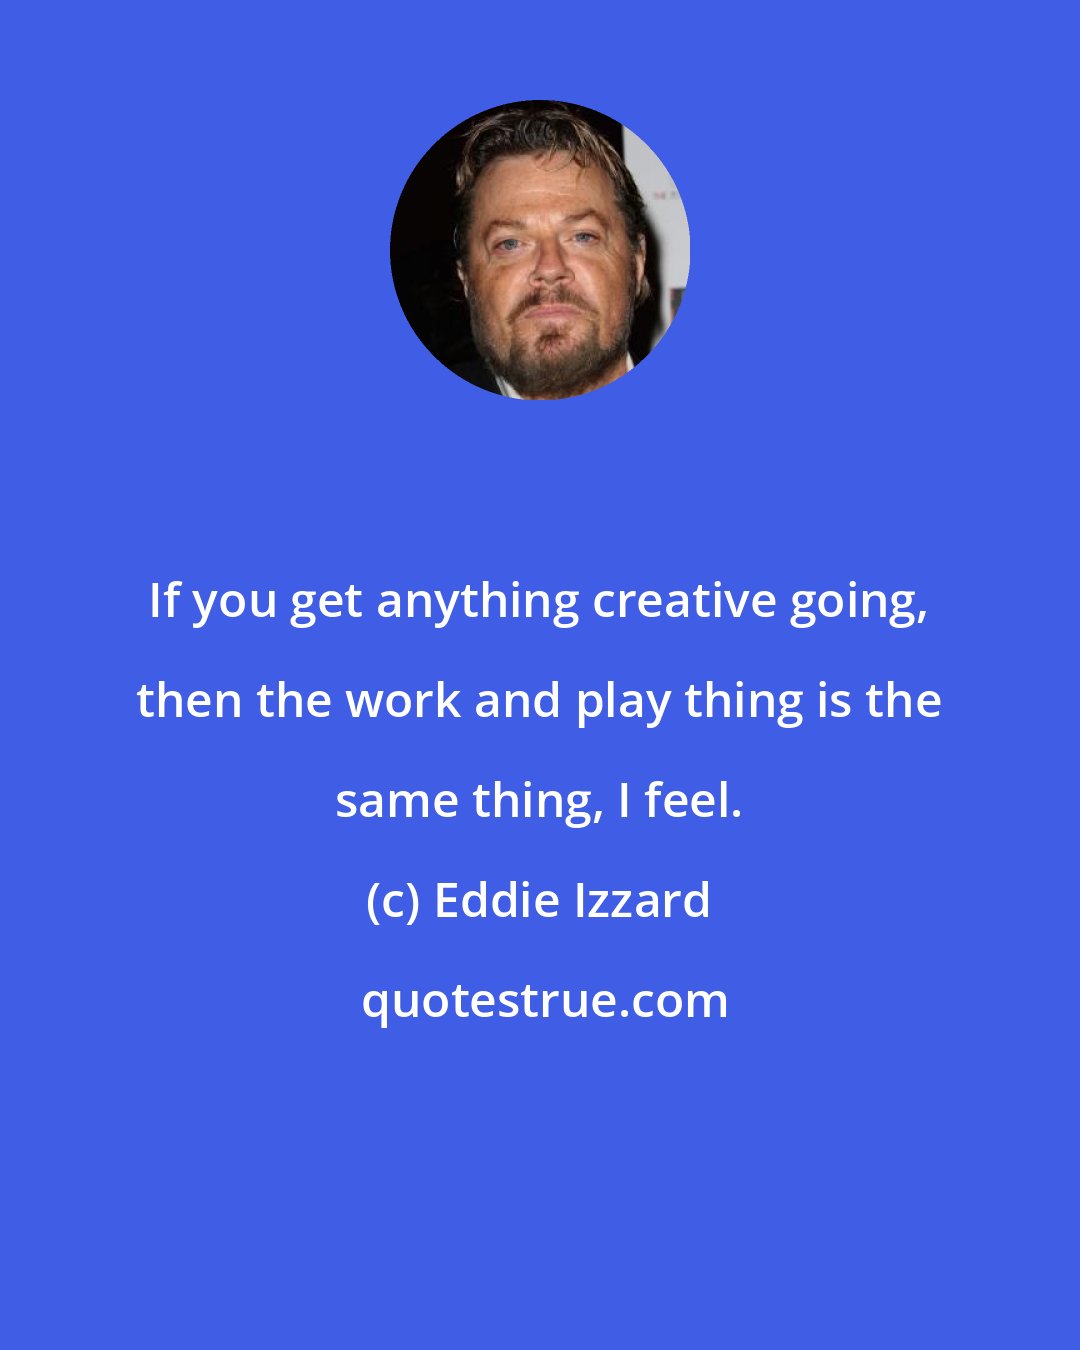 Eddie Izzard: If you get anything creative going, then the work and play thing is the same thing, I feel.